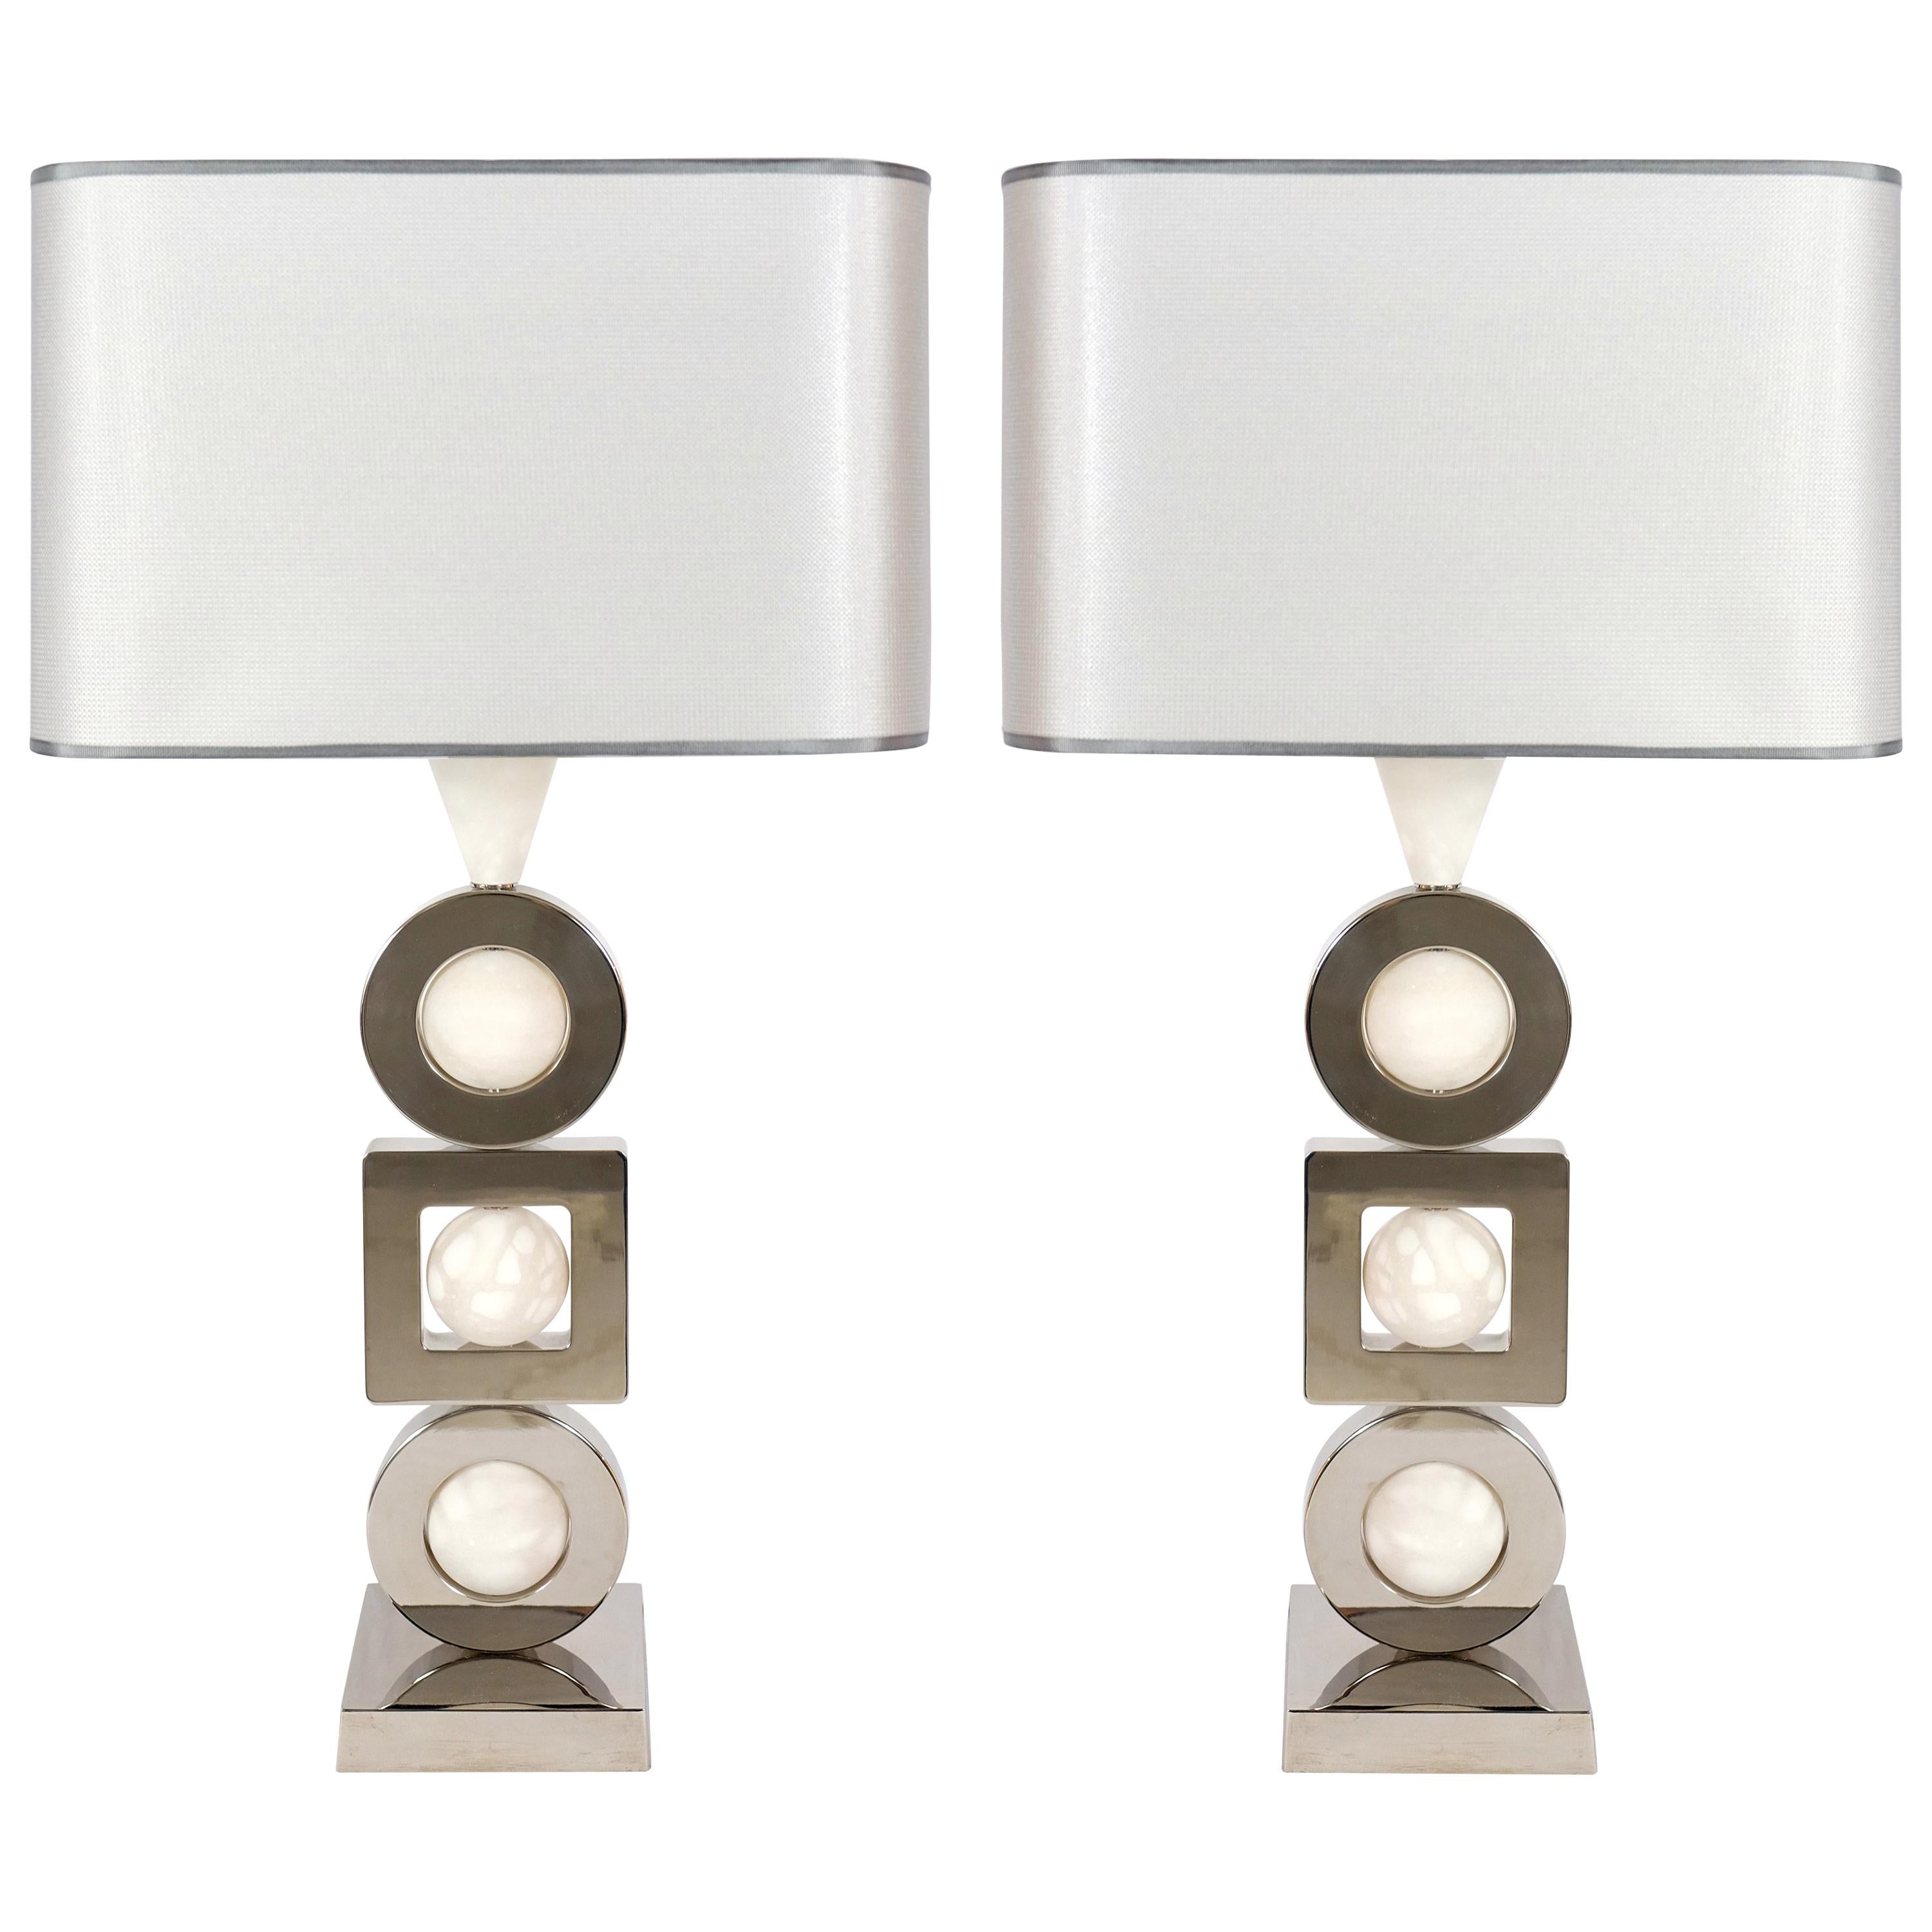 Laudarte Srl Andromeda Table Lamp by Attilio Amato, pair available